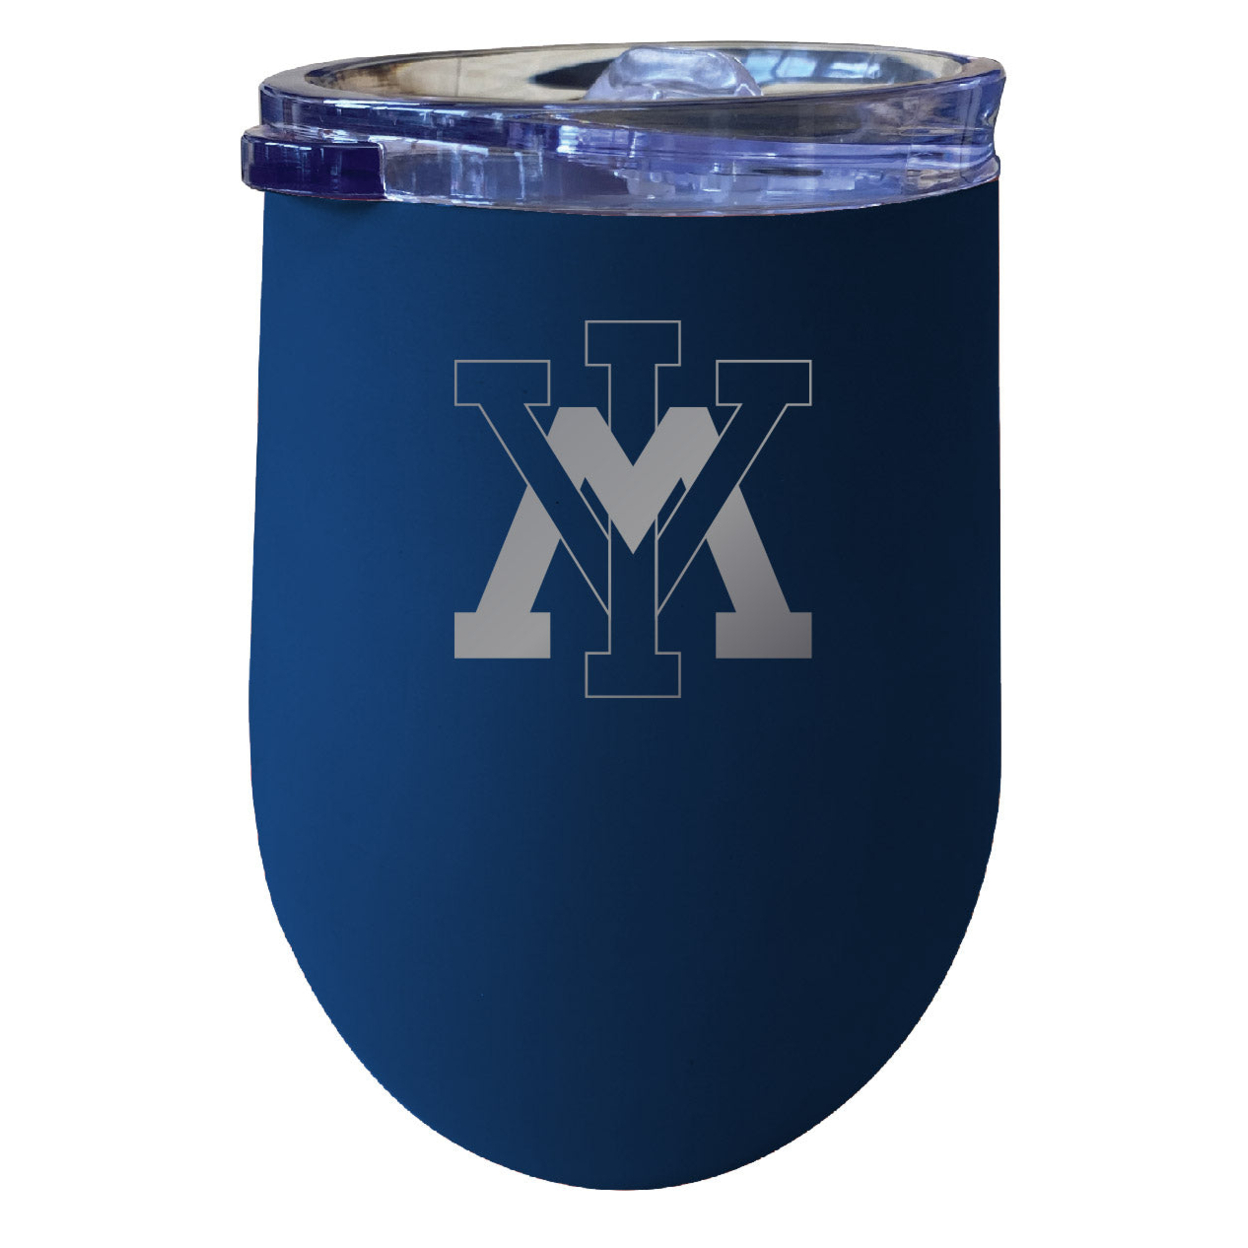 VMI Keydets 12 Oz Etched Insulated Wine Stainless Steel Tumbler - Choose Your Color - Seafoam